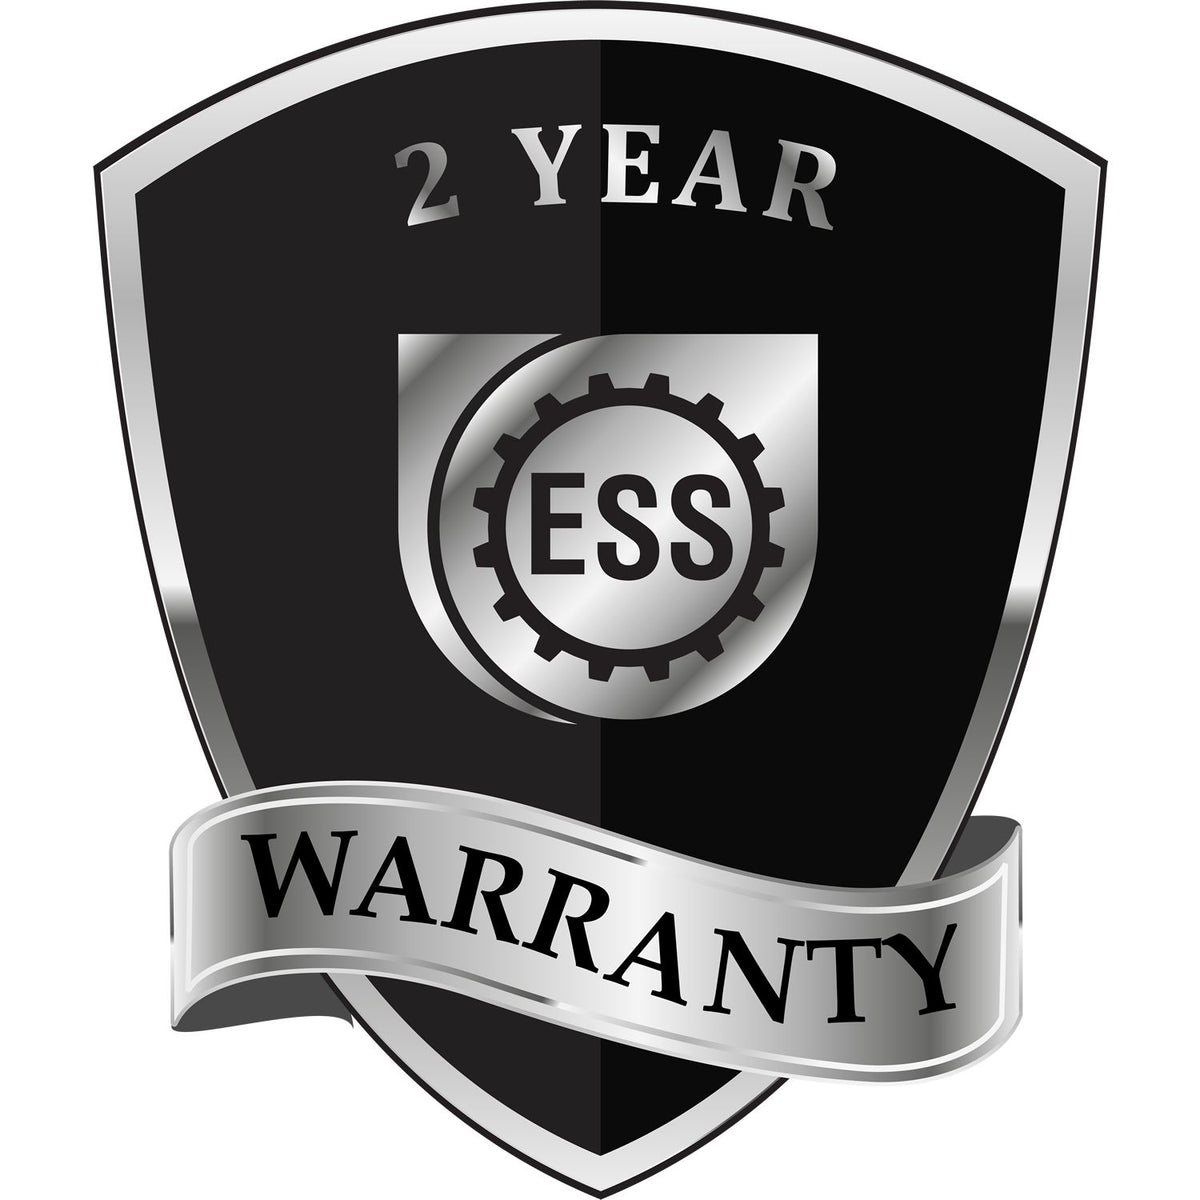 A black and silver badge or emblem showing warranty information for the Heavy Duty Cast Iron Arizona Geologist Seal Embosser